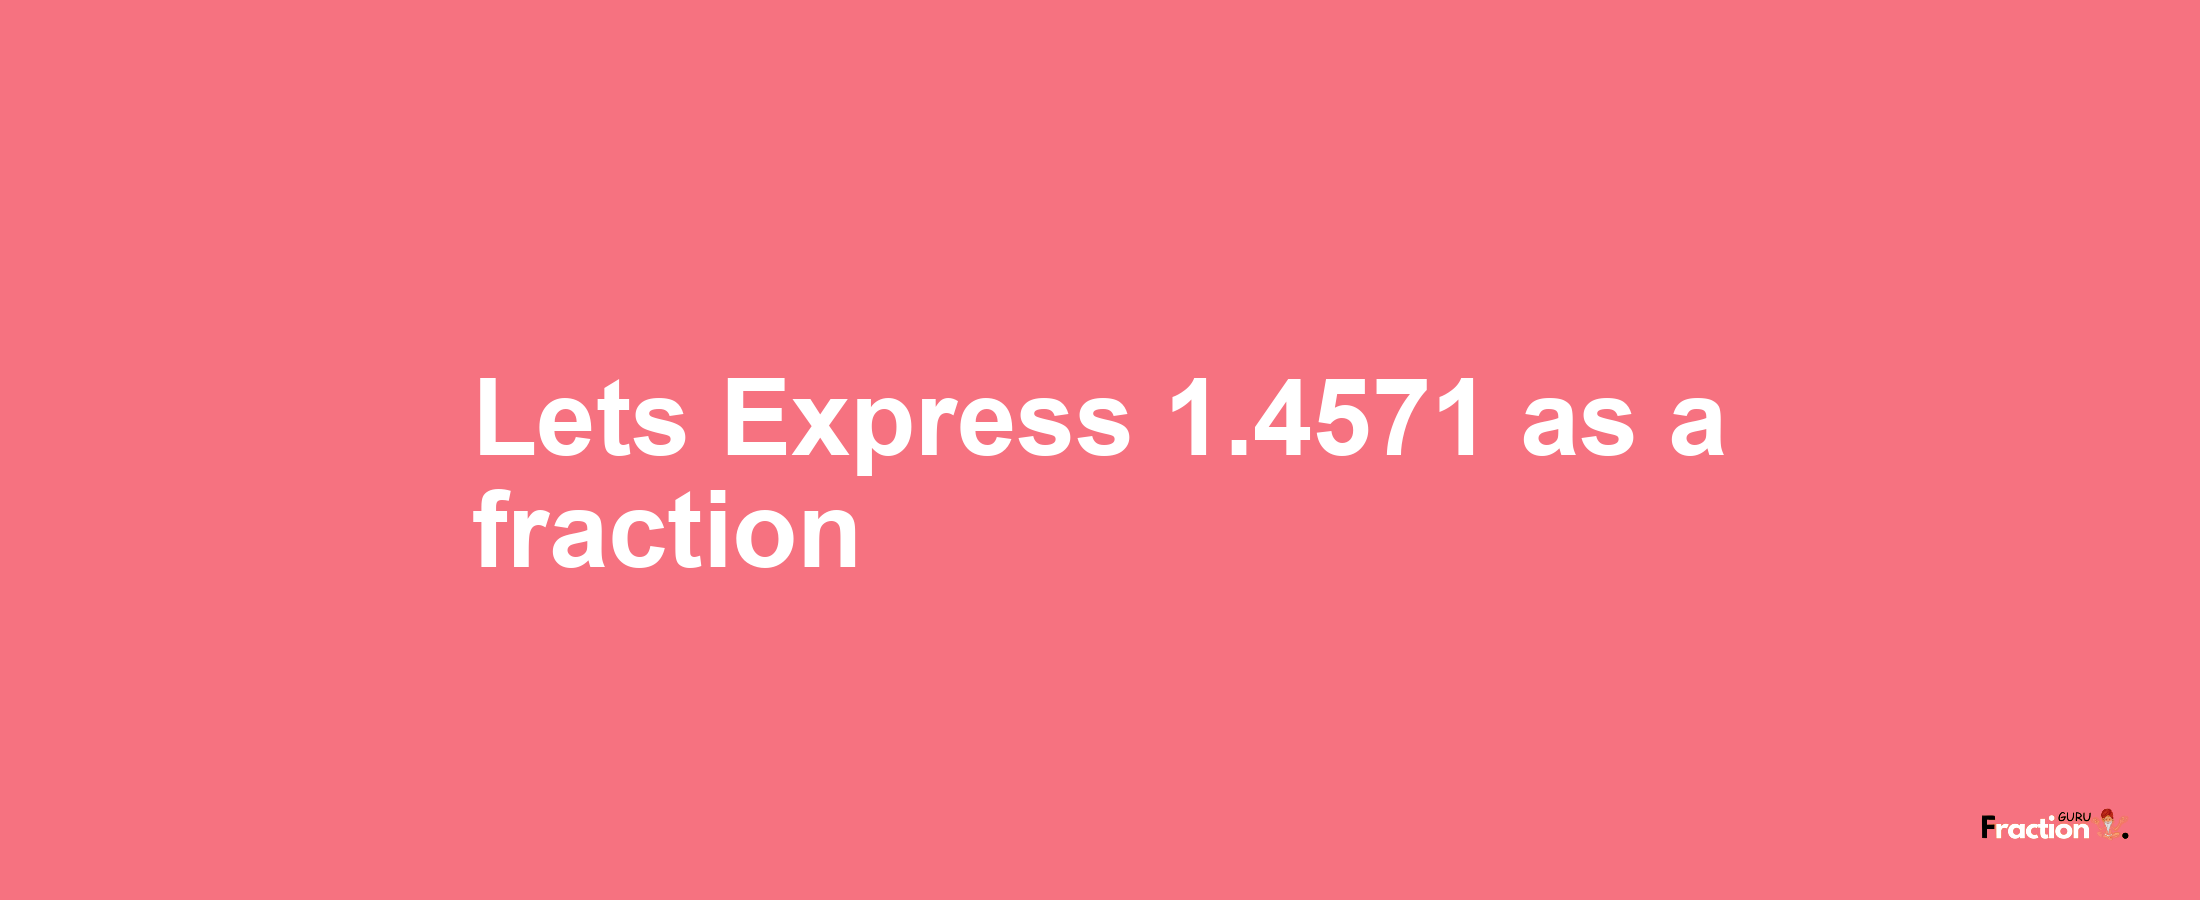 Lets Express 1.4571 as afraction